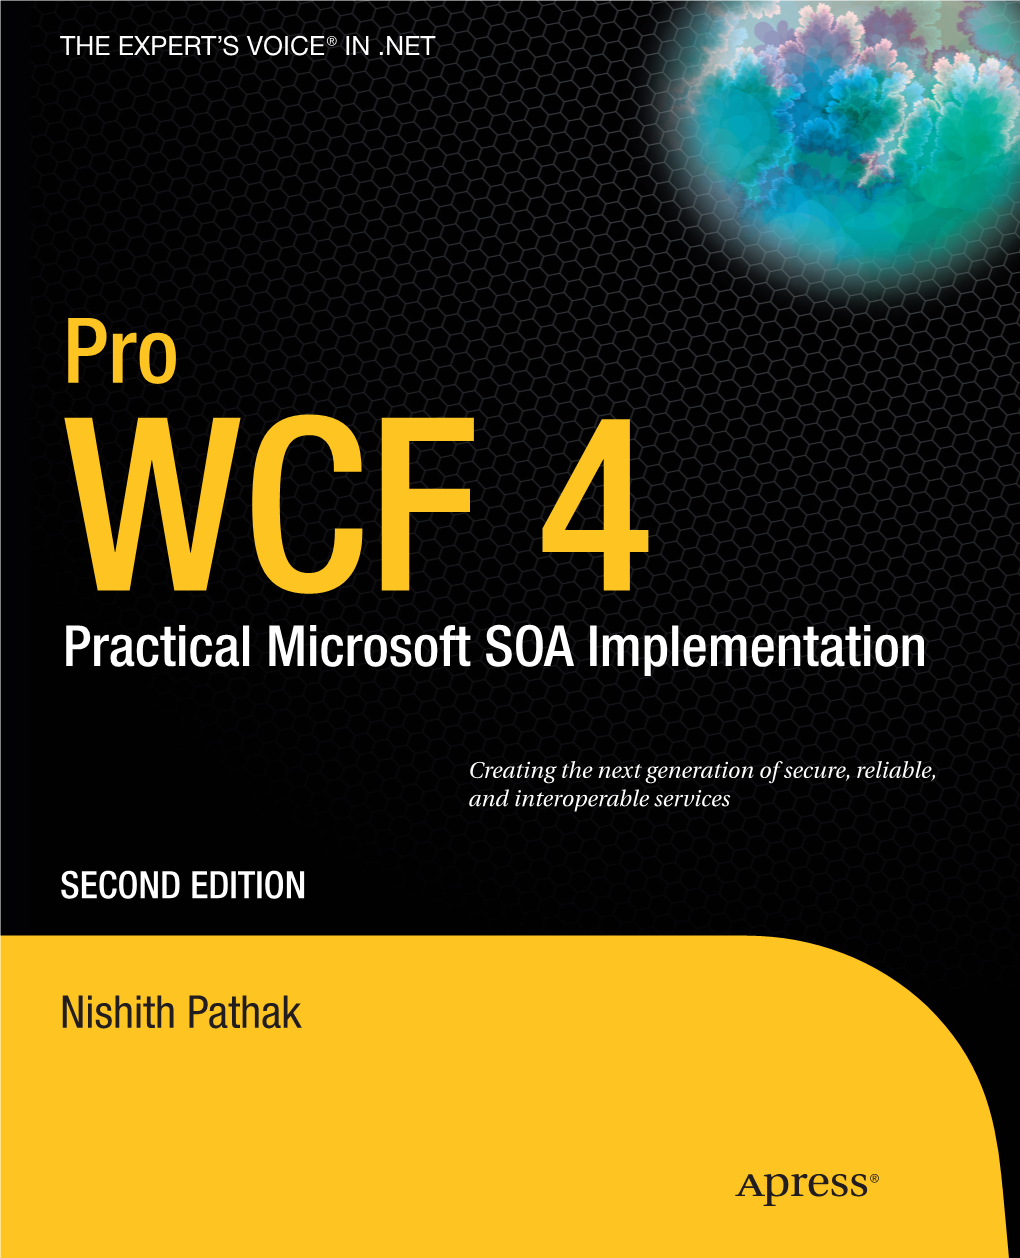 Pro WCF 4: Practical Microsoft SOA Implementation, Second Edition Copyright © 2011 by Nishith Pathak All Rights Reserved